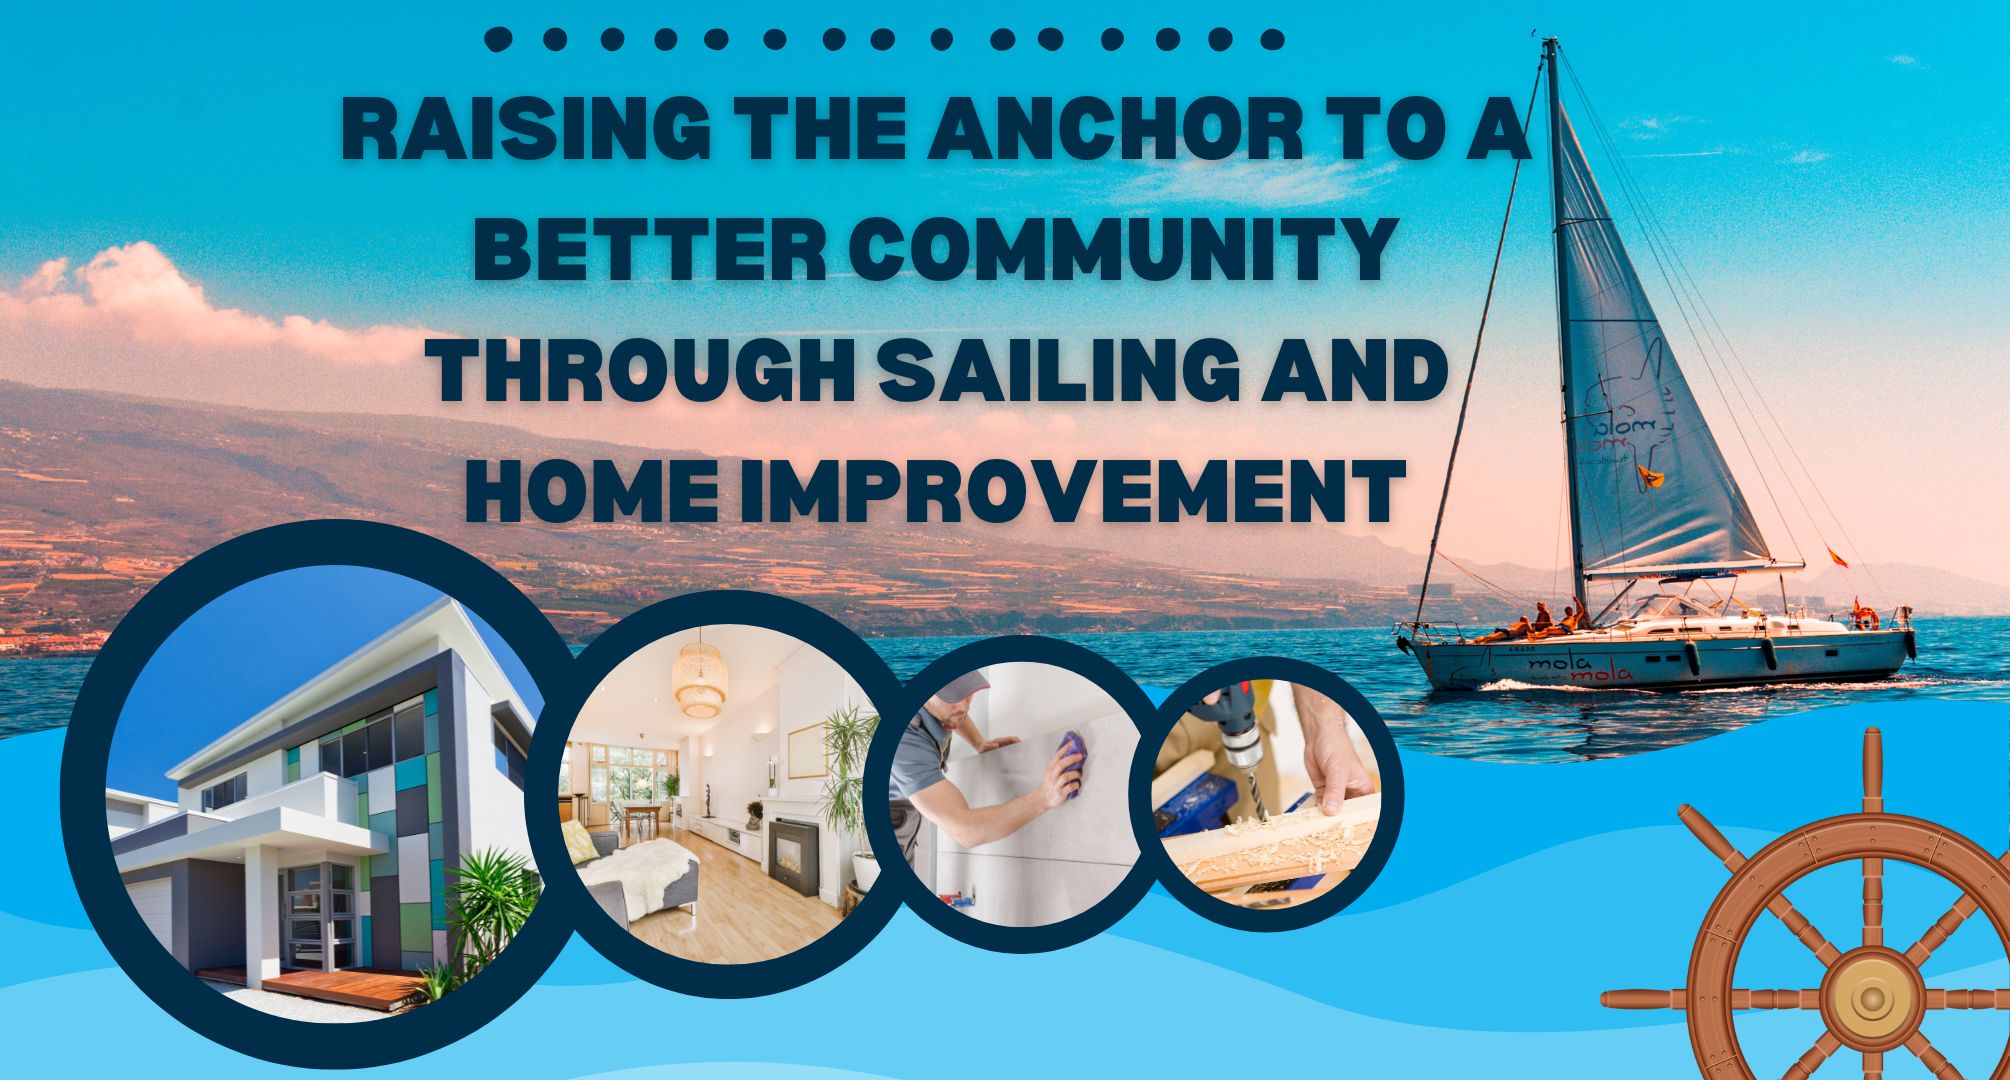 Sailability NSW: The Intersection of Sailing and Home Improvement